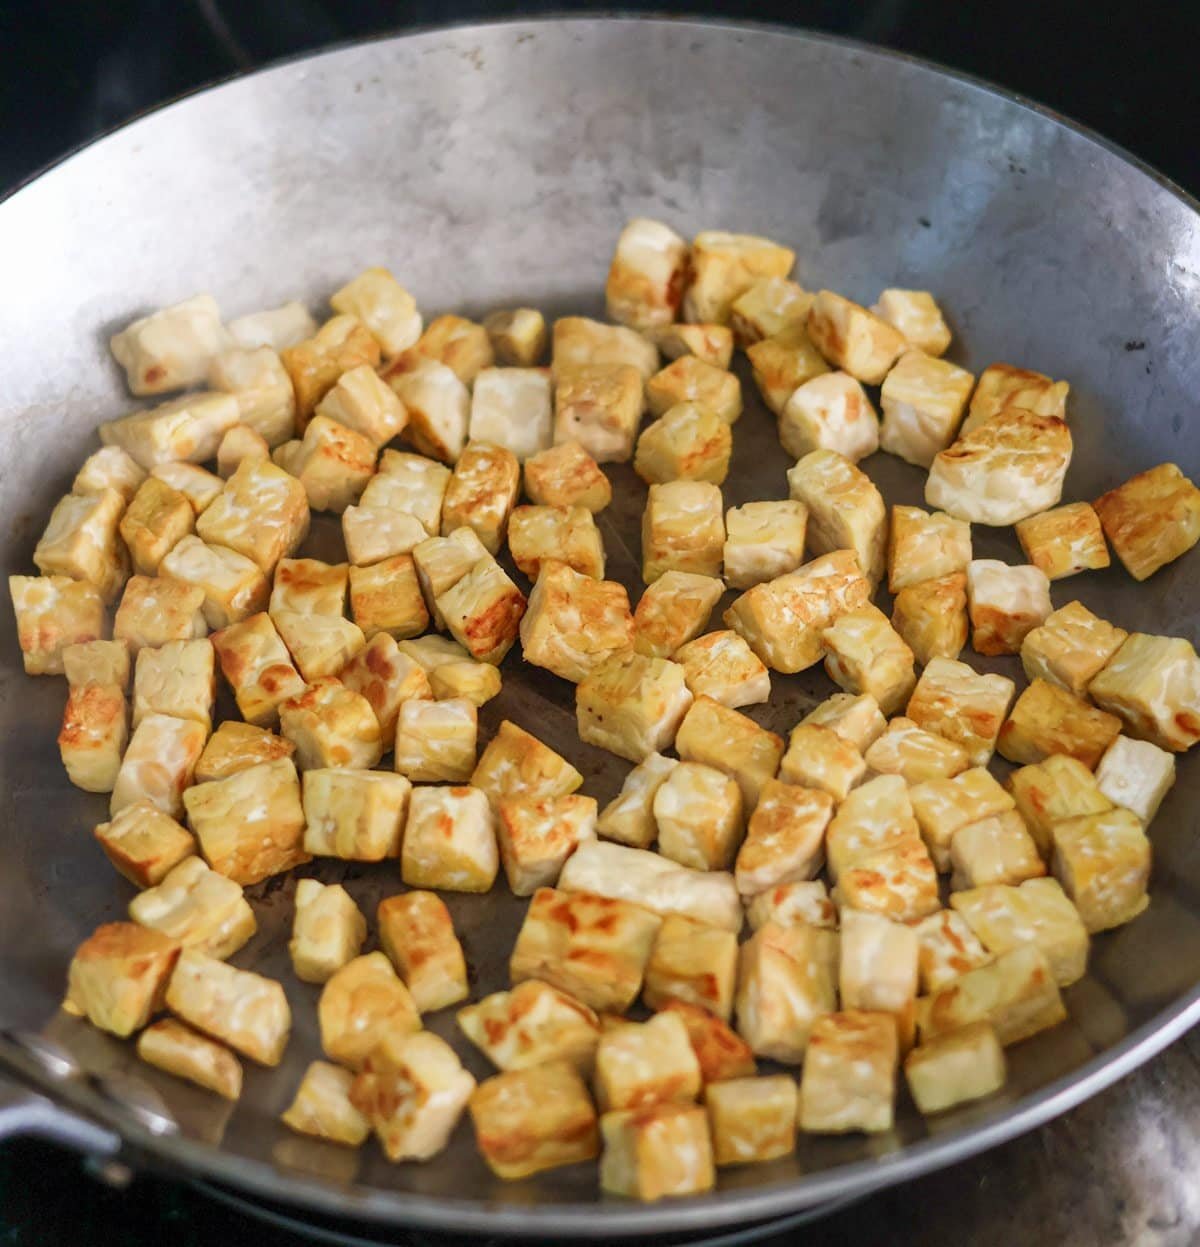 Fried tempeh in a cast iron pan.